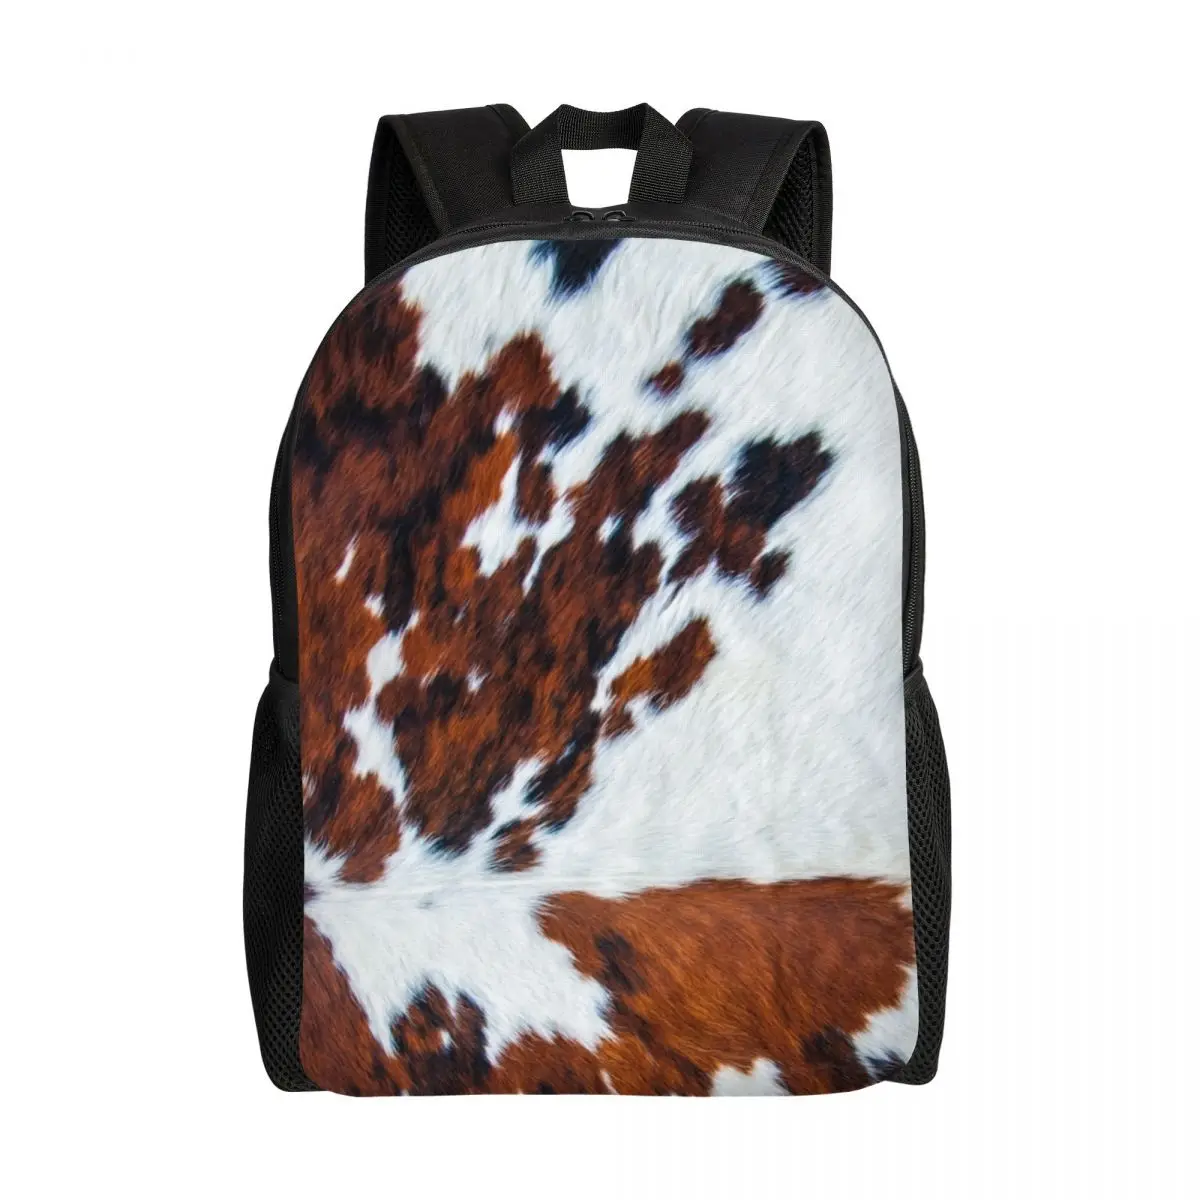 

Rustic Cow Faux Fur Skin Leather Backpack School College Students Bookbag Fits 15 Inch Laptop Animal Cowhide Texture Bags